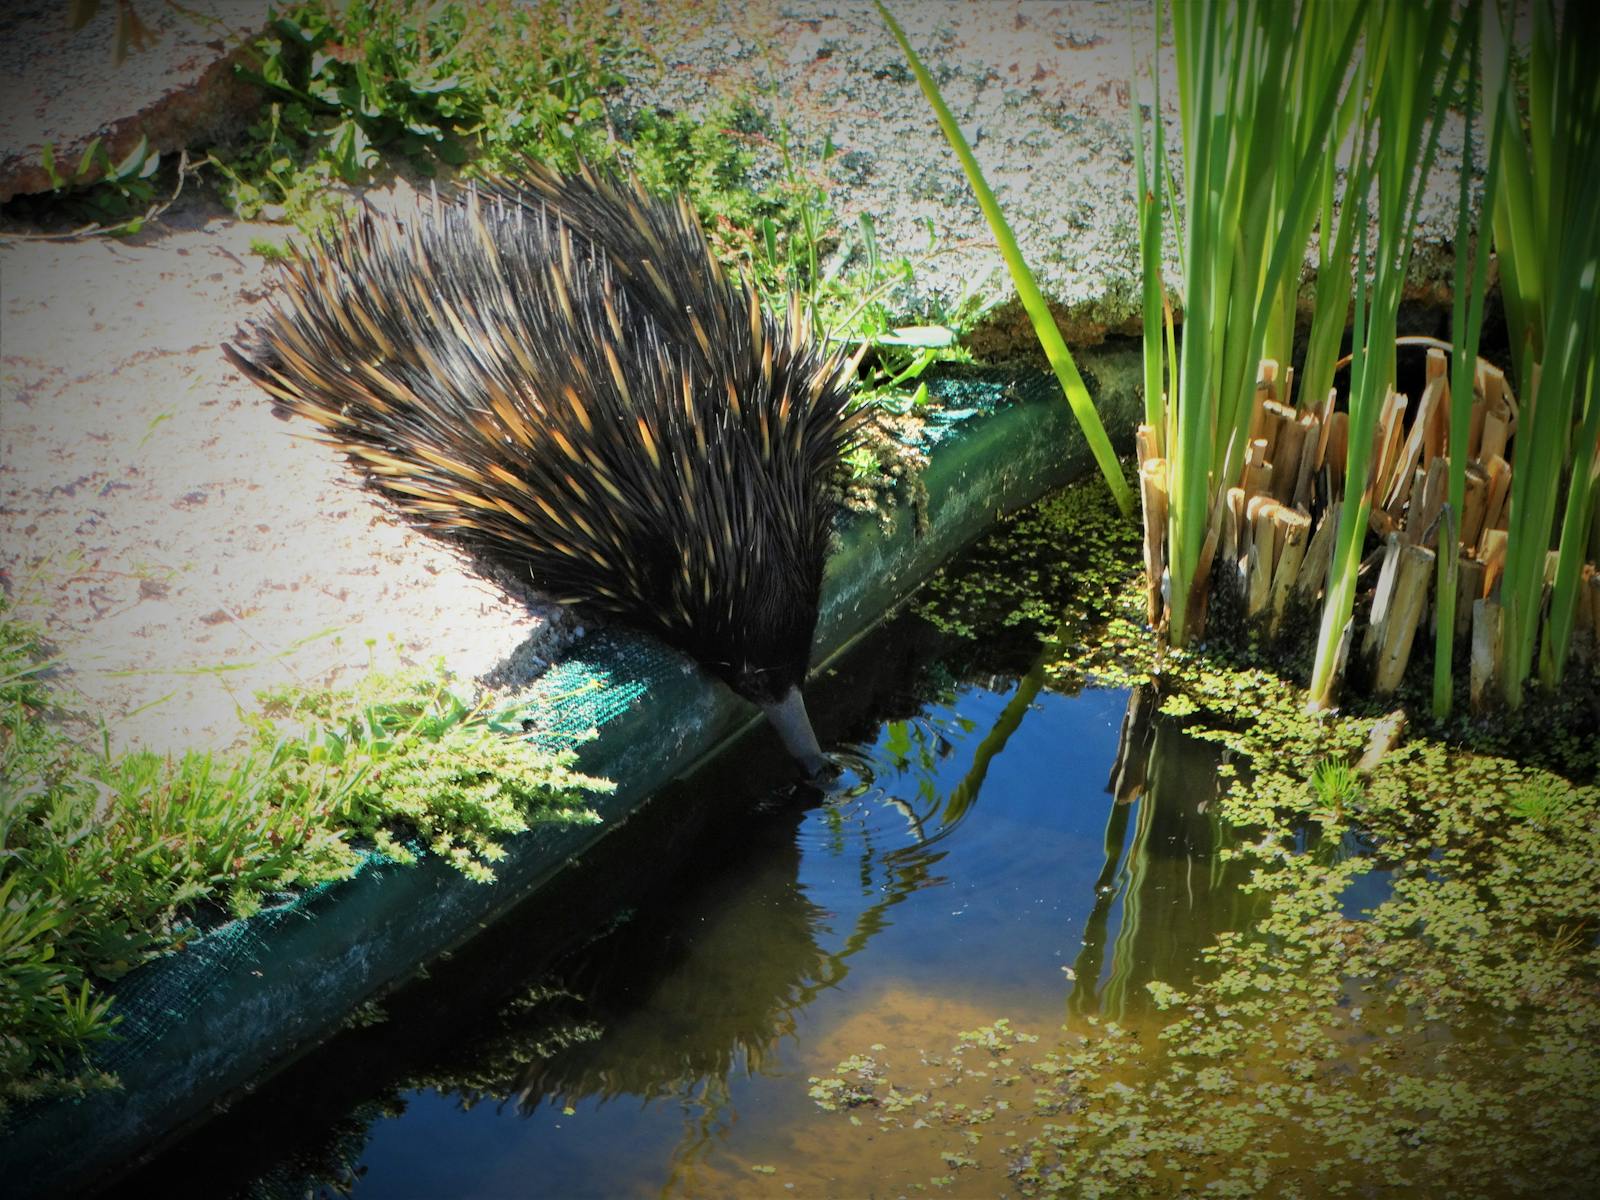 Echidnas are common sights at Greasstress GPNR; our rockpool is very popular during dry times